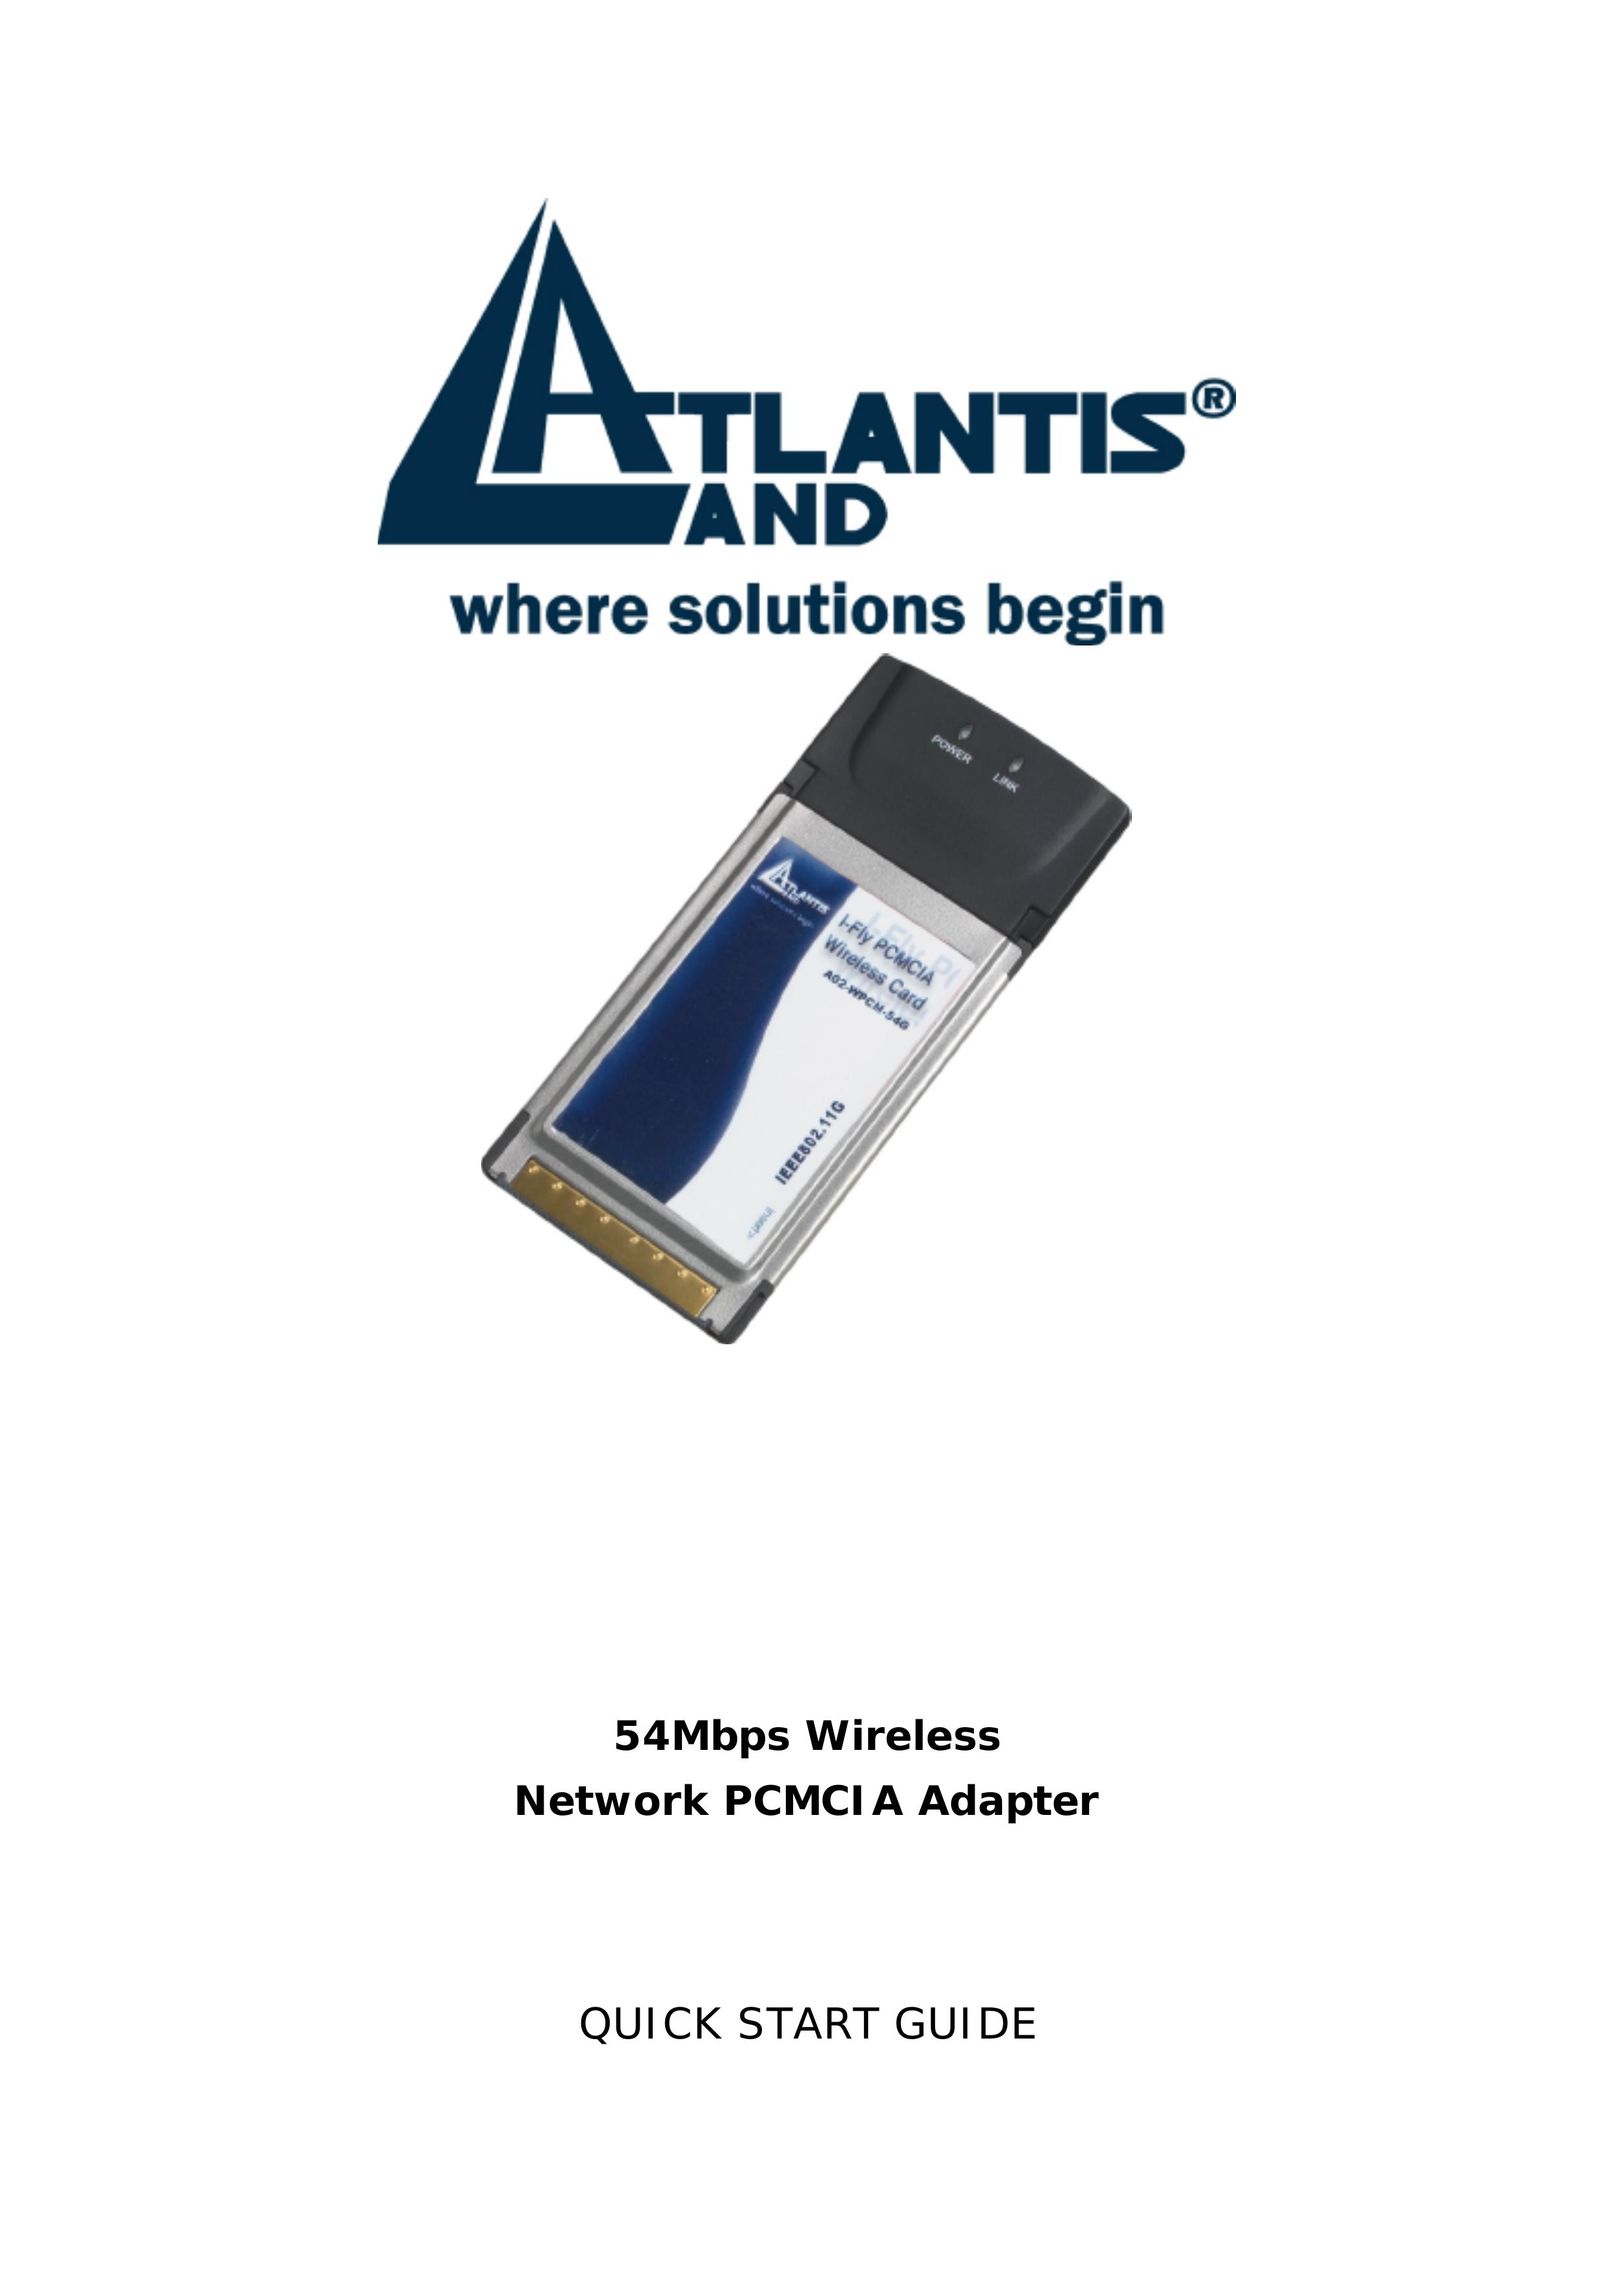 Atlantis Land 54Mbps Wireless Network PCMCIA Adapter Network Card User Manual